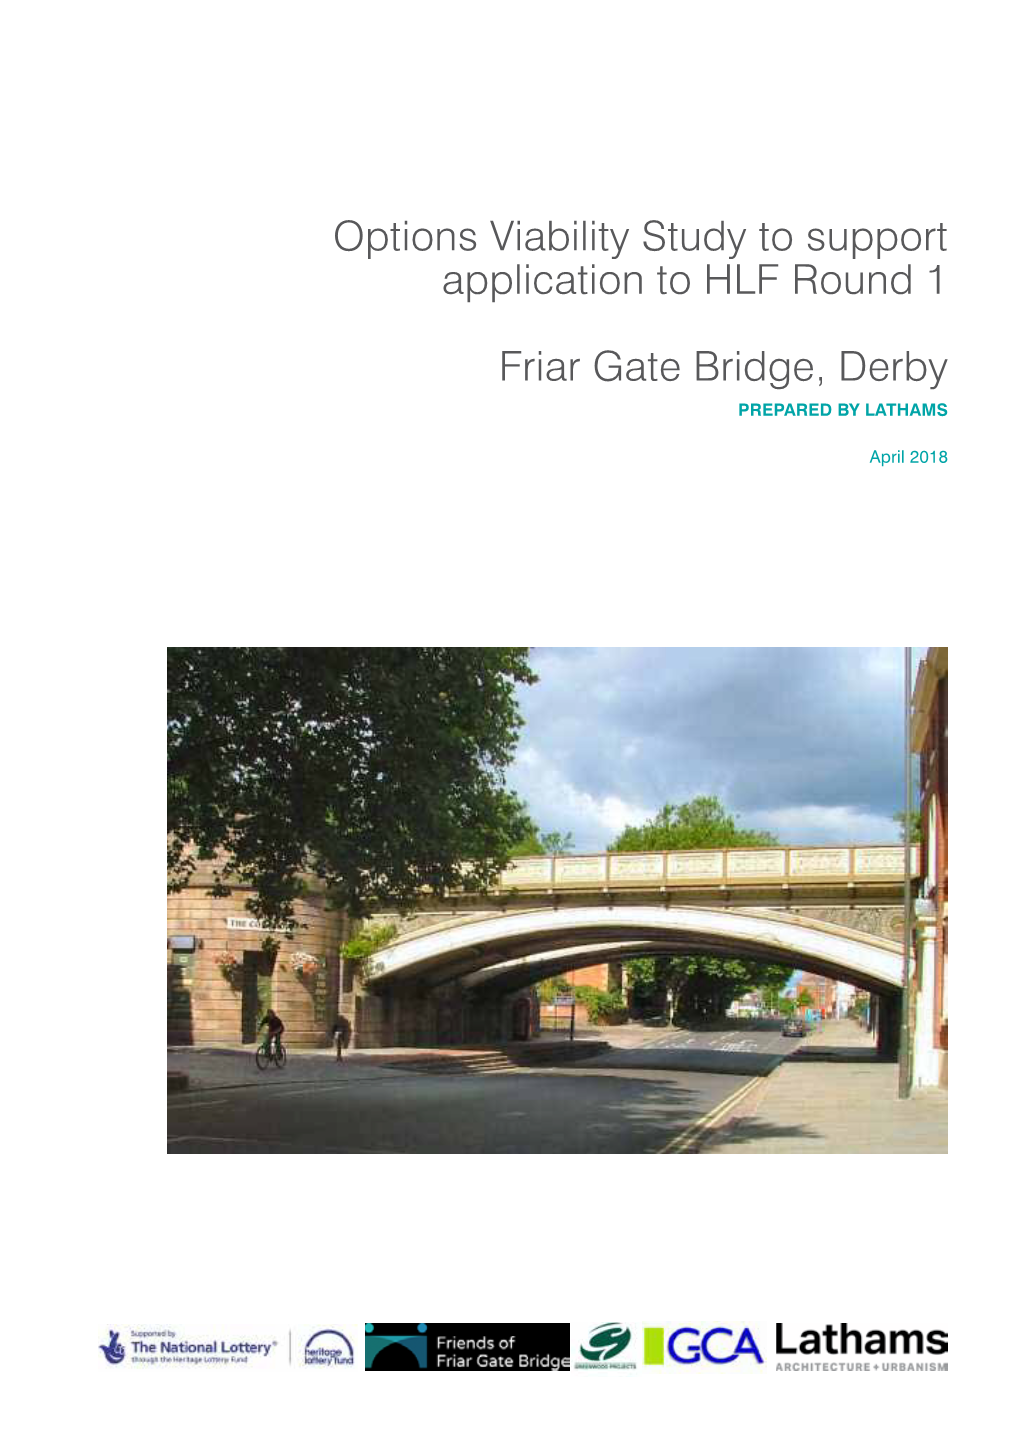 Options Viability Study to Support Application to HLF Round 1 Friar